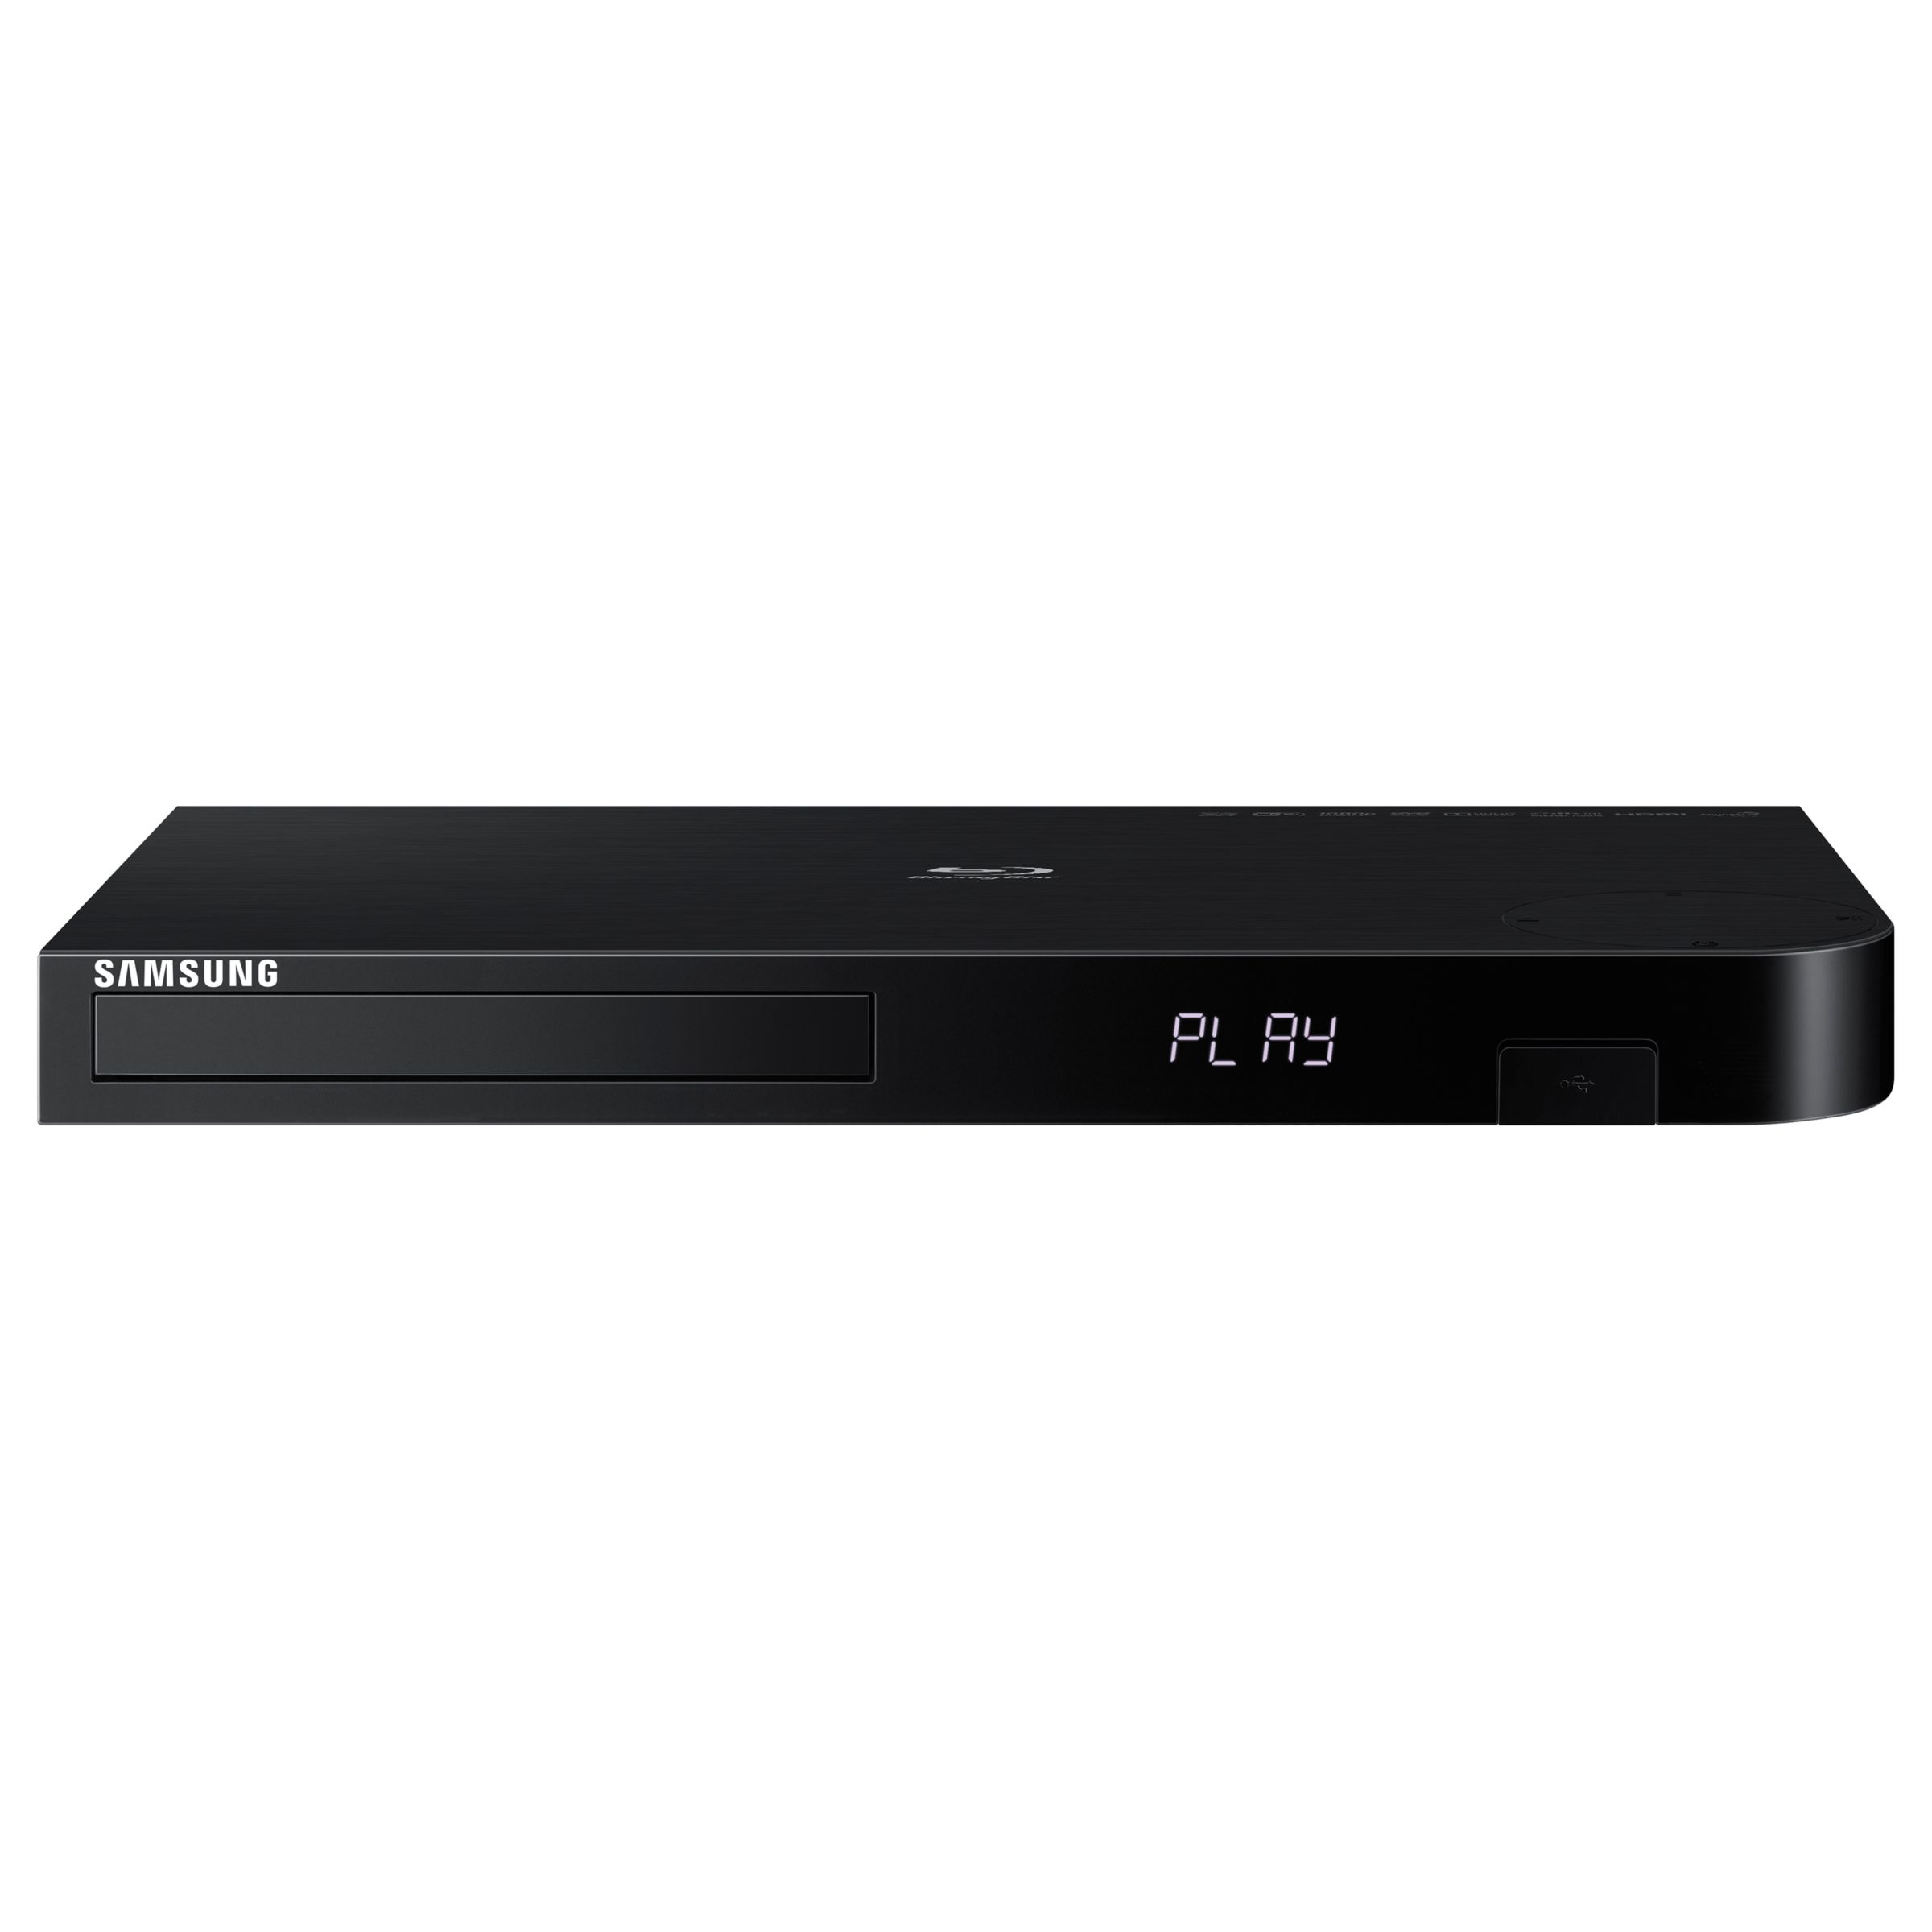 Samsung BD-J6300 Smart 3D 4K Upscaling Blu-ray/DVD Player with Built-In Wi-Fi